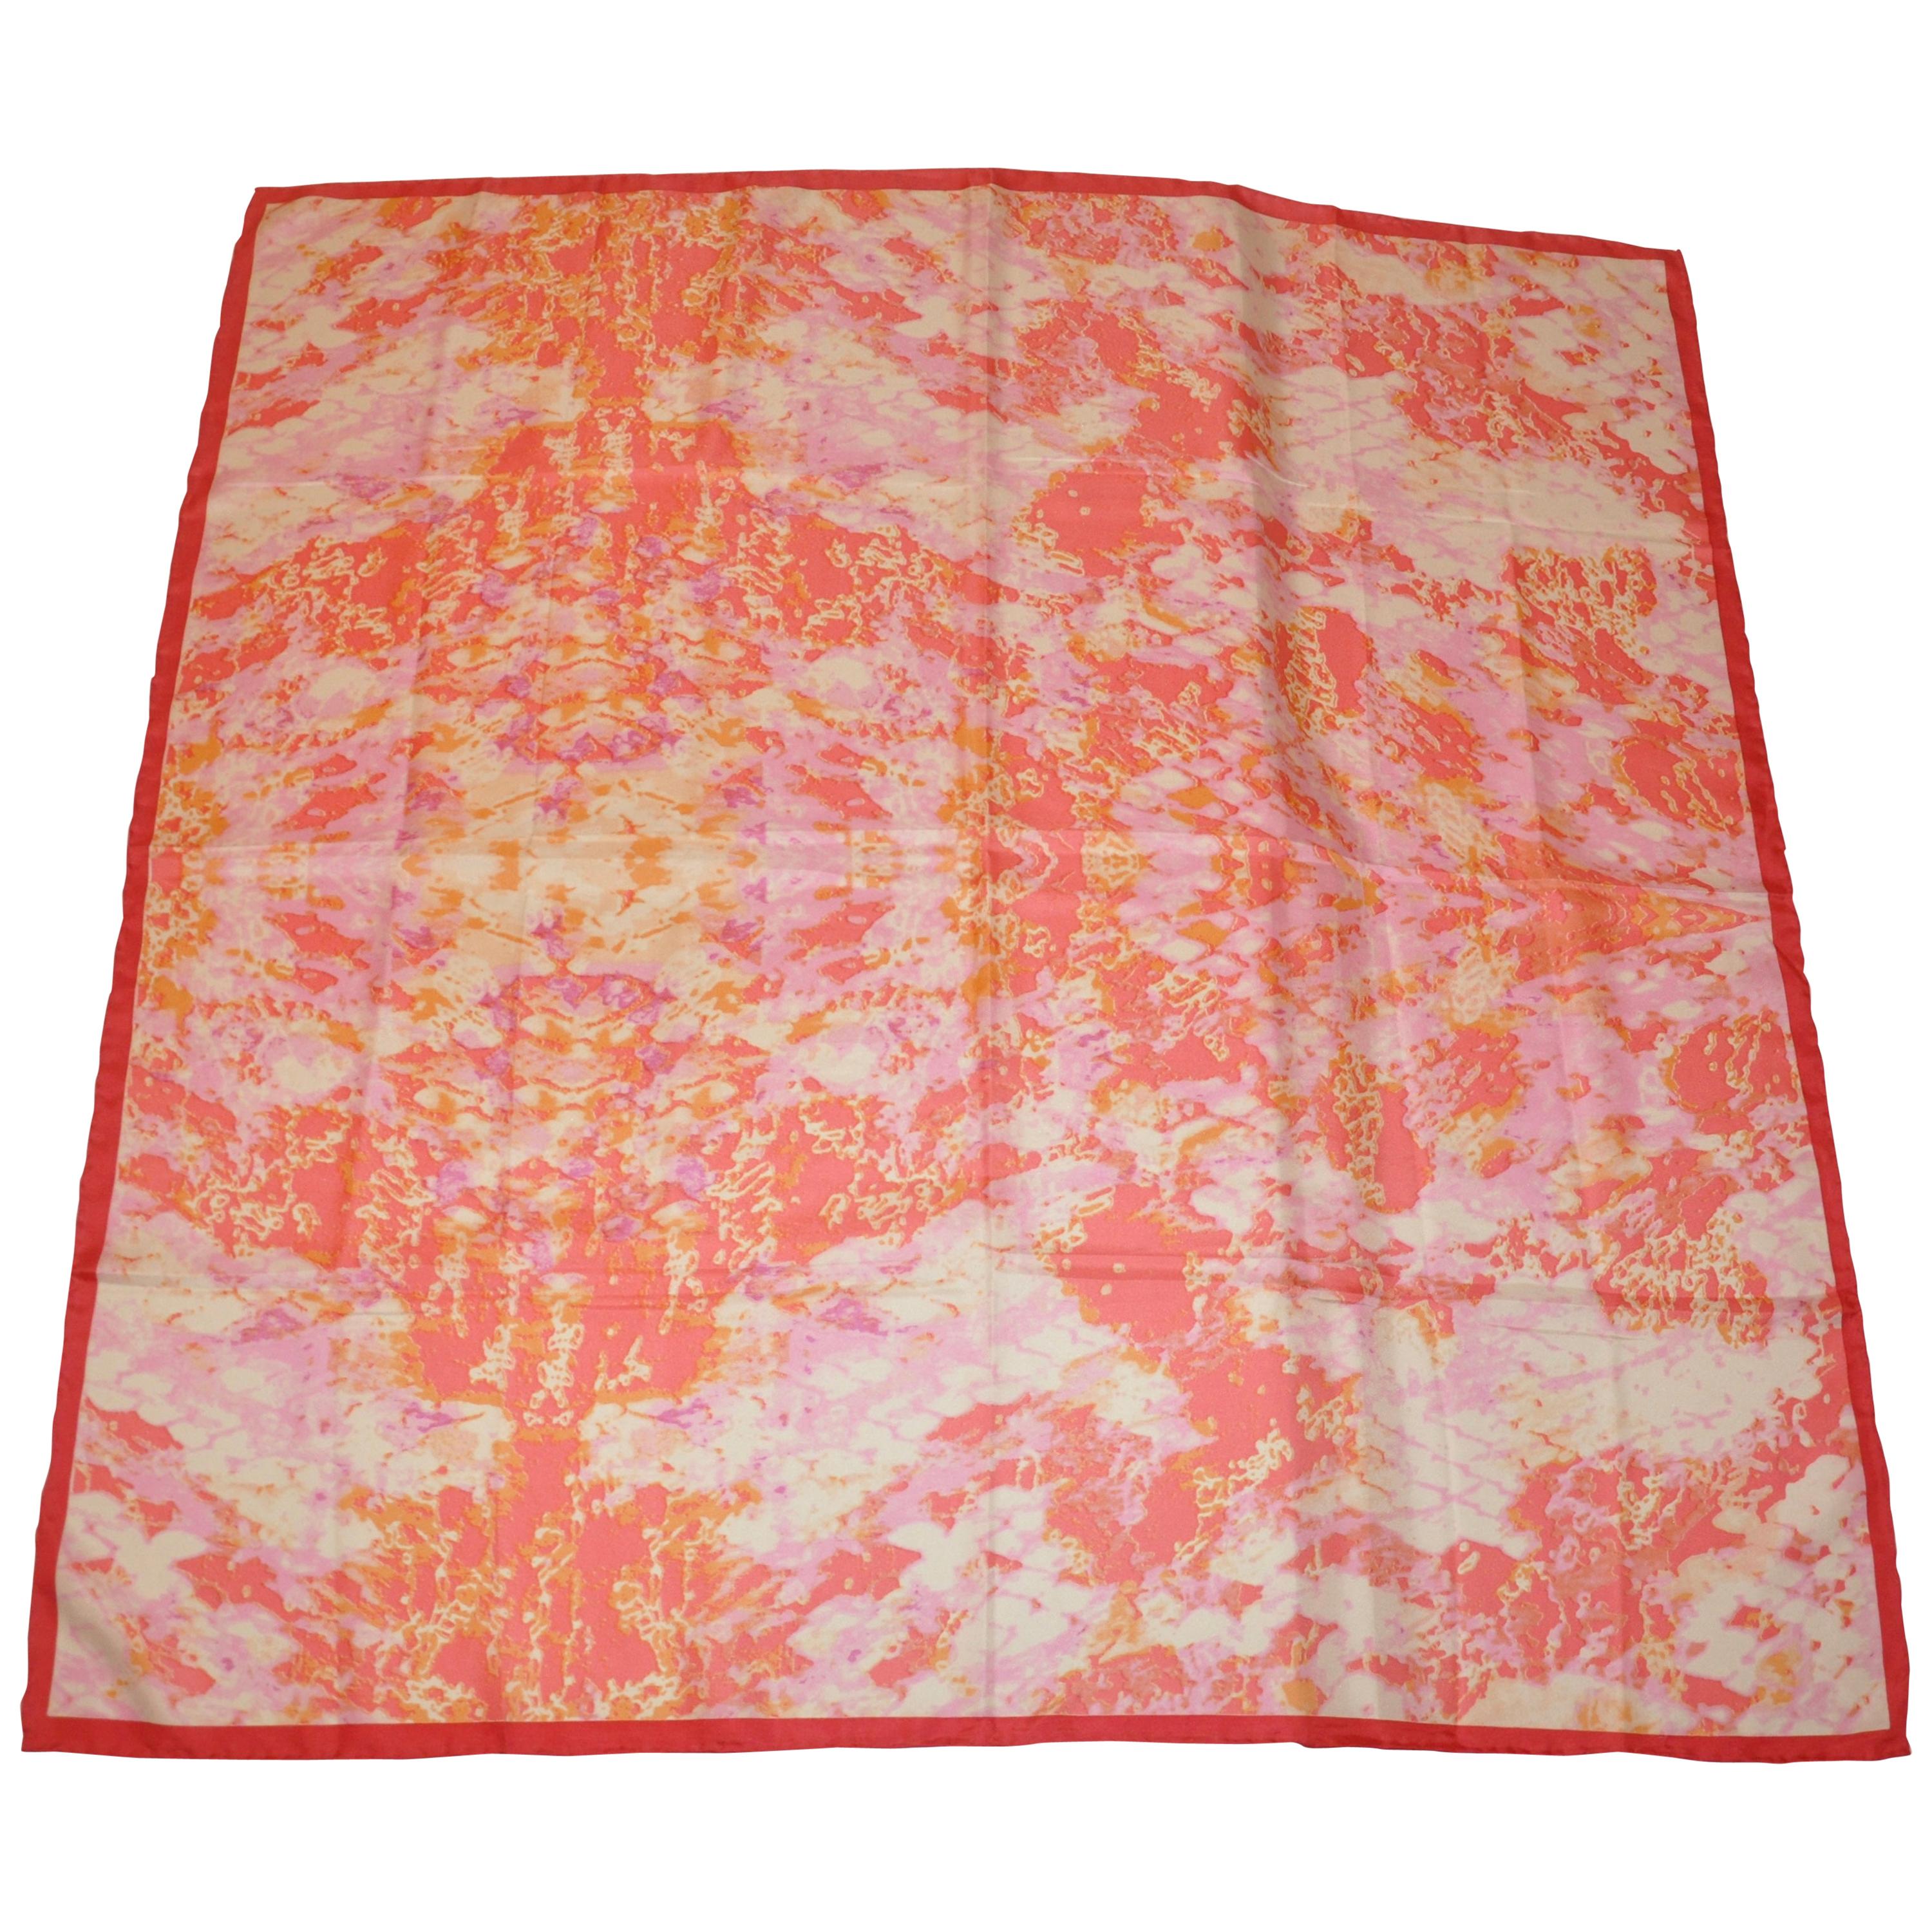 Huge "Shades  of Pinks, Corals, Lavender & White Silk Scarf